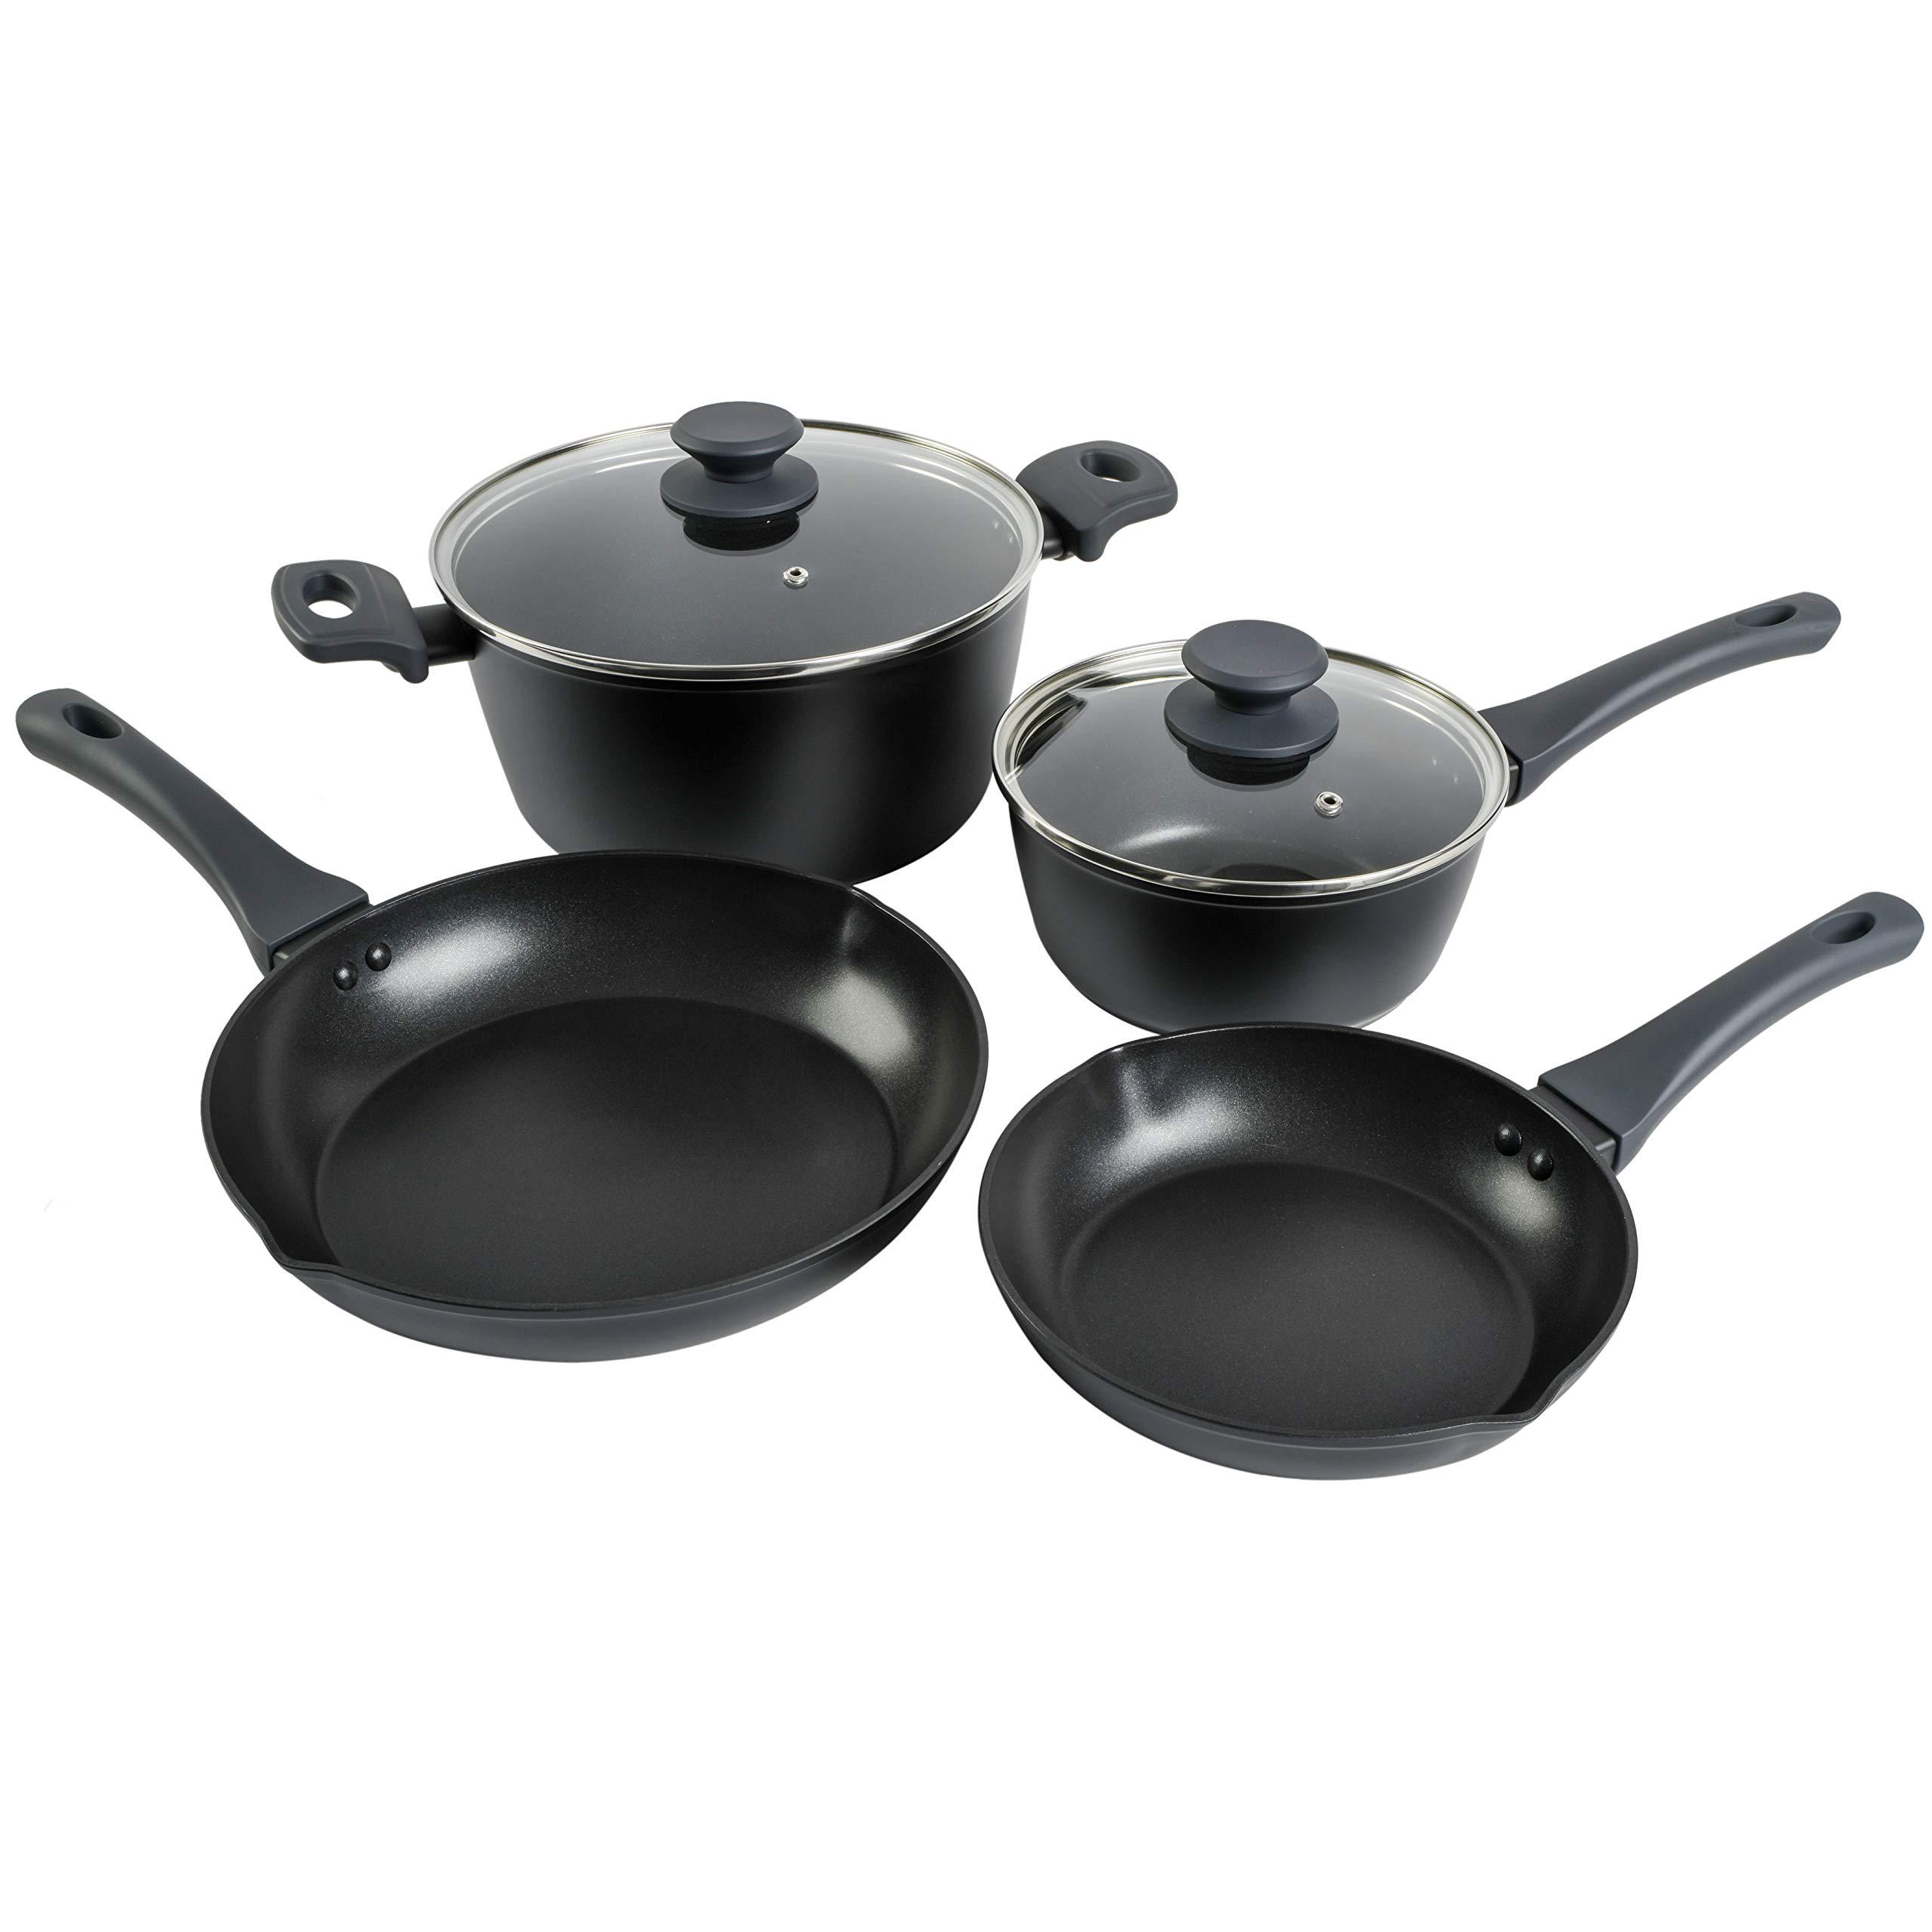 gibson soho lounge nonstick forged aluminum induction pots and pans cookware set, 6-piece, matte black